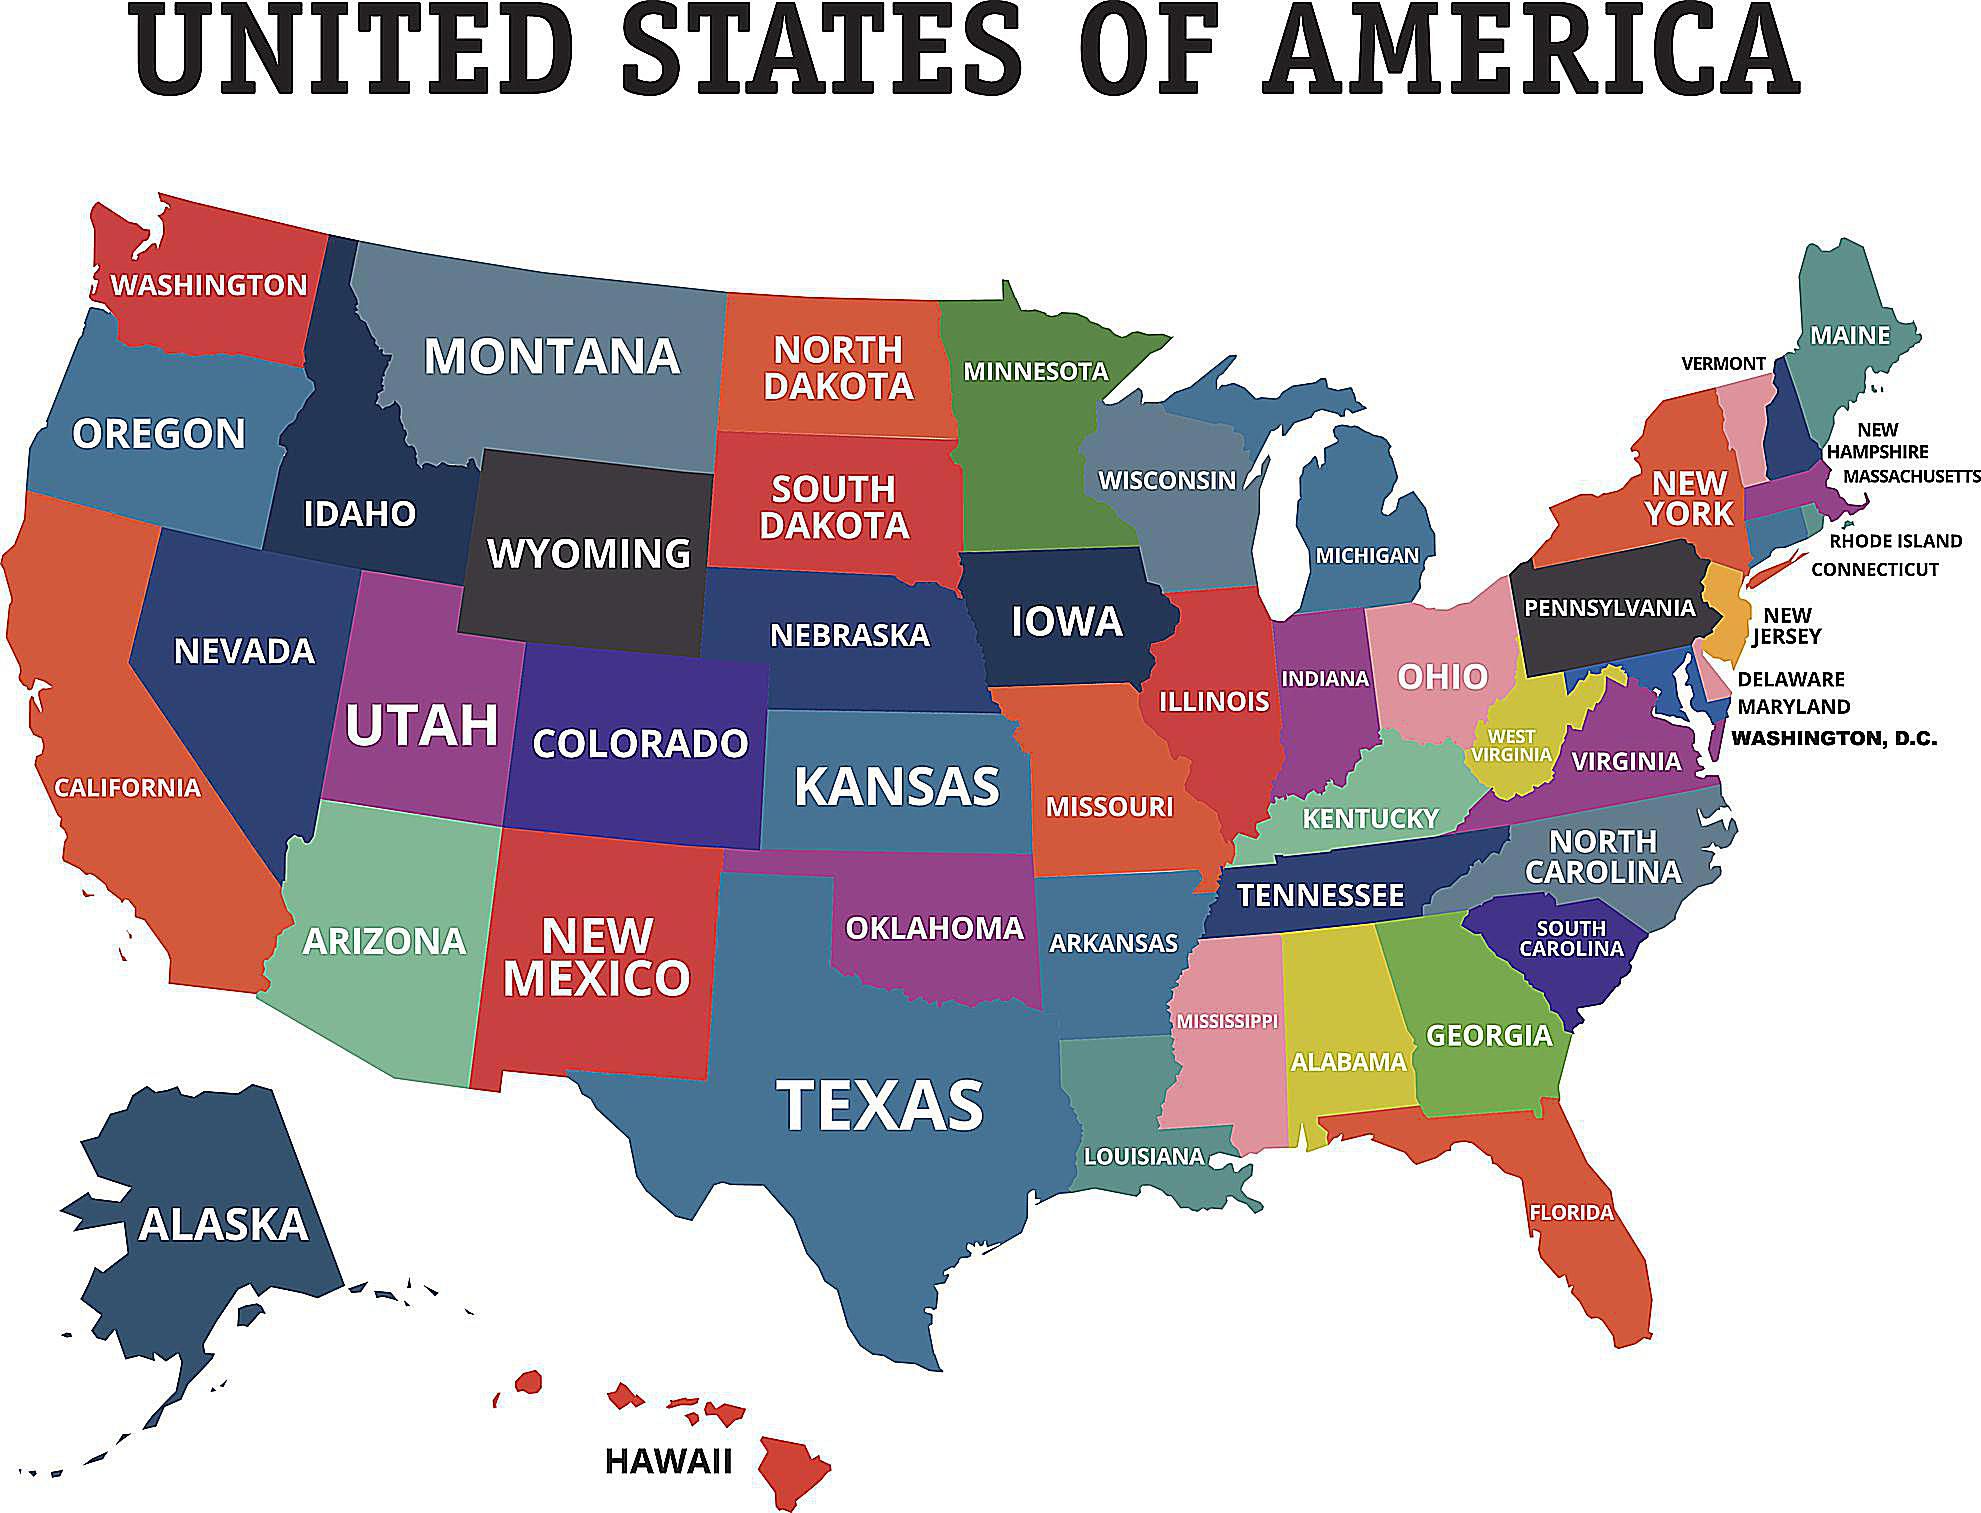 Official and Nonofficial Nicknames of U.S. States